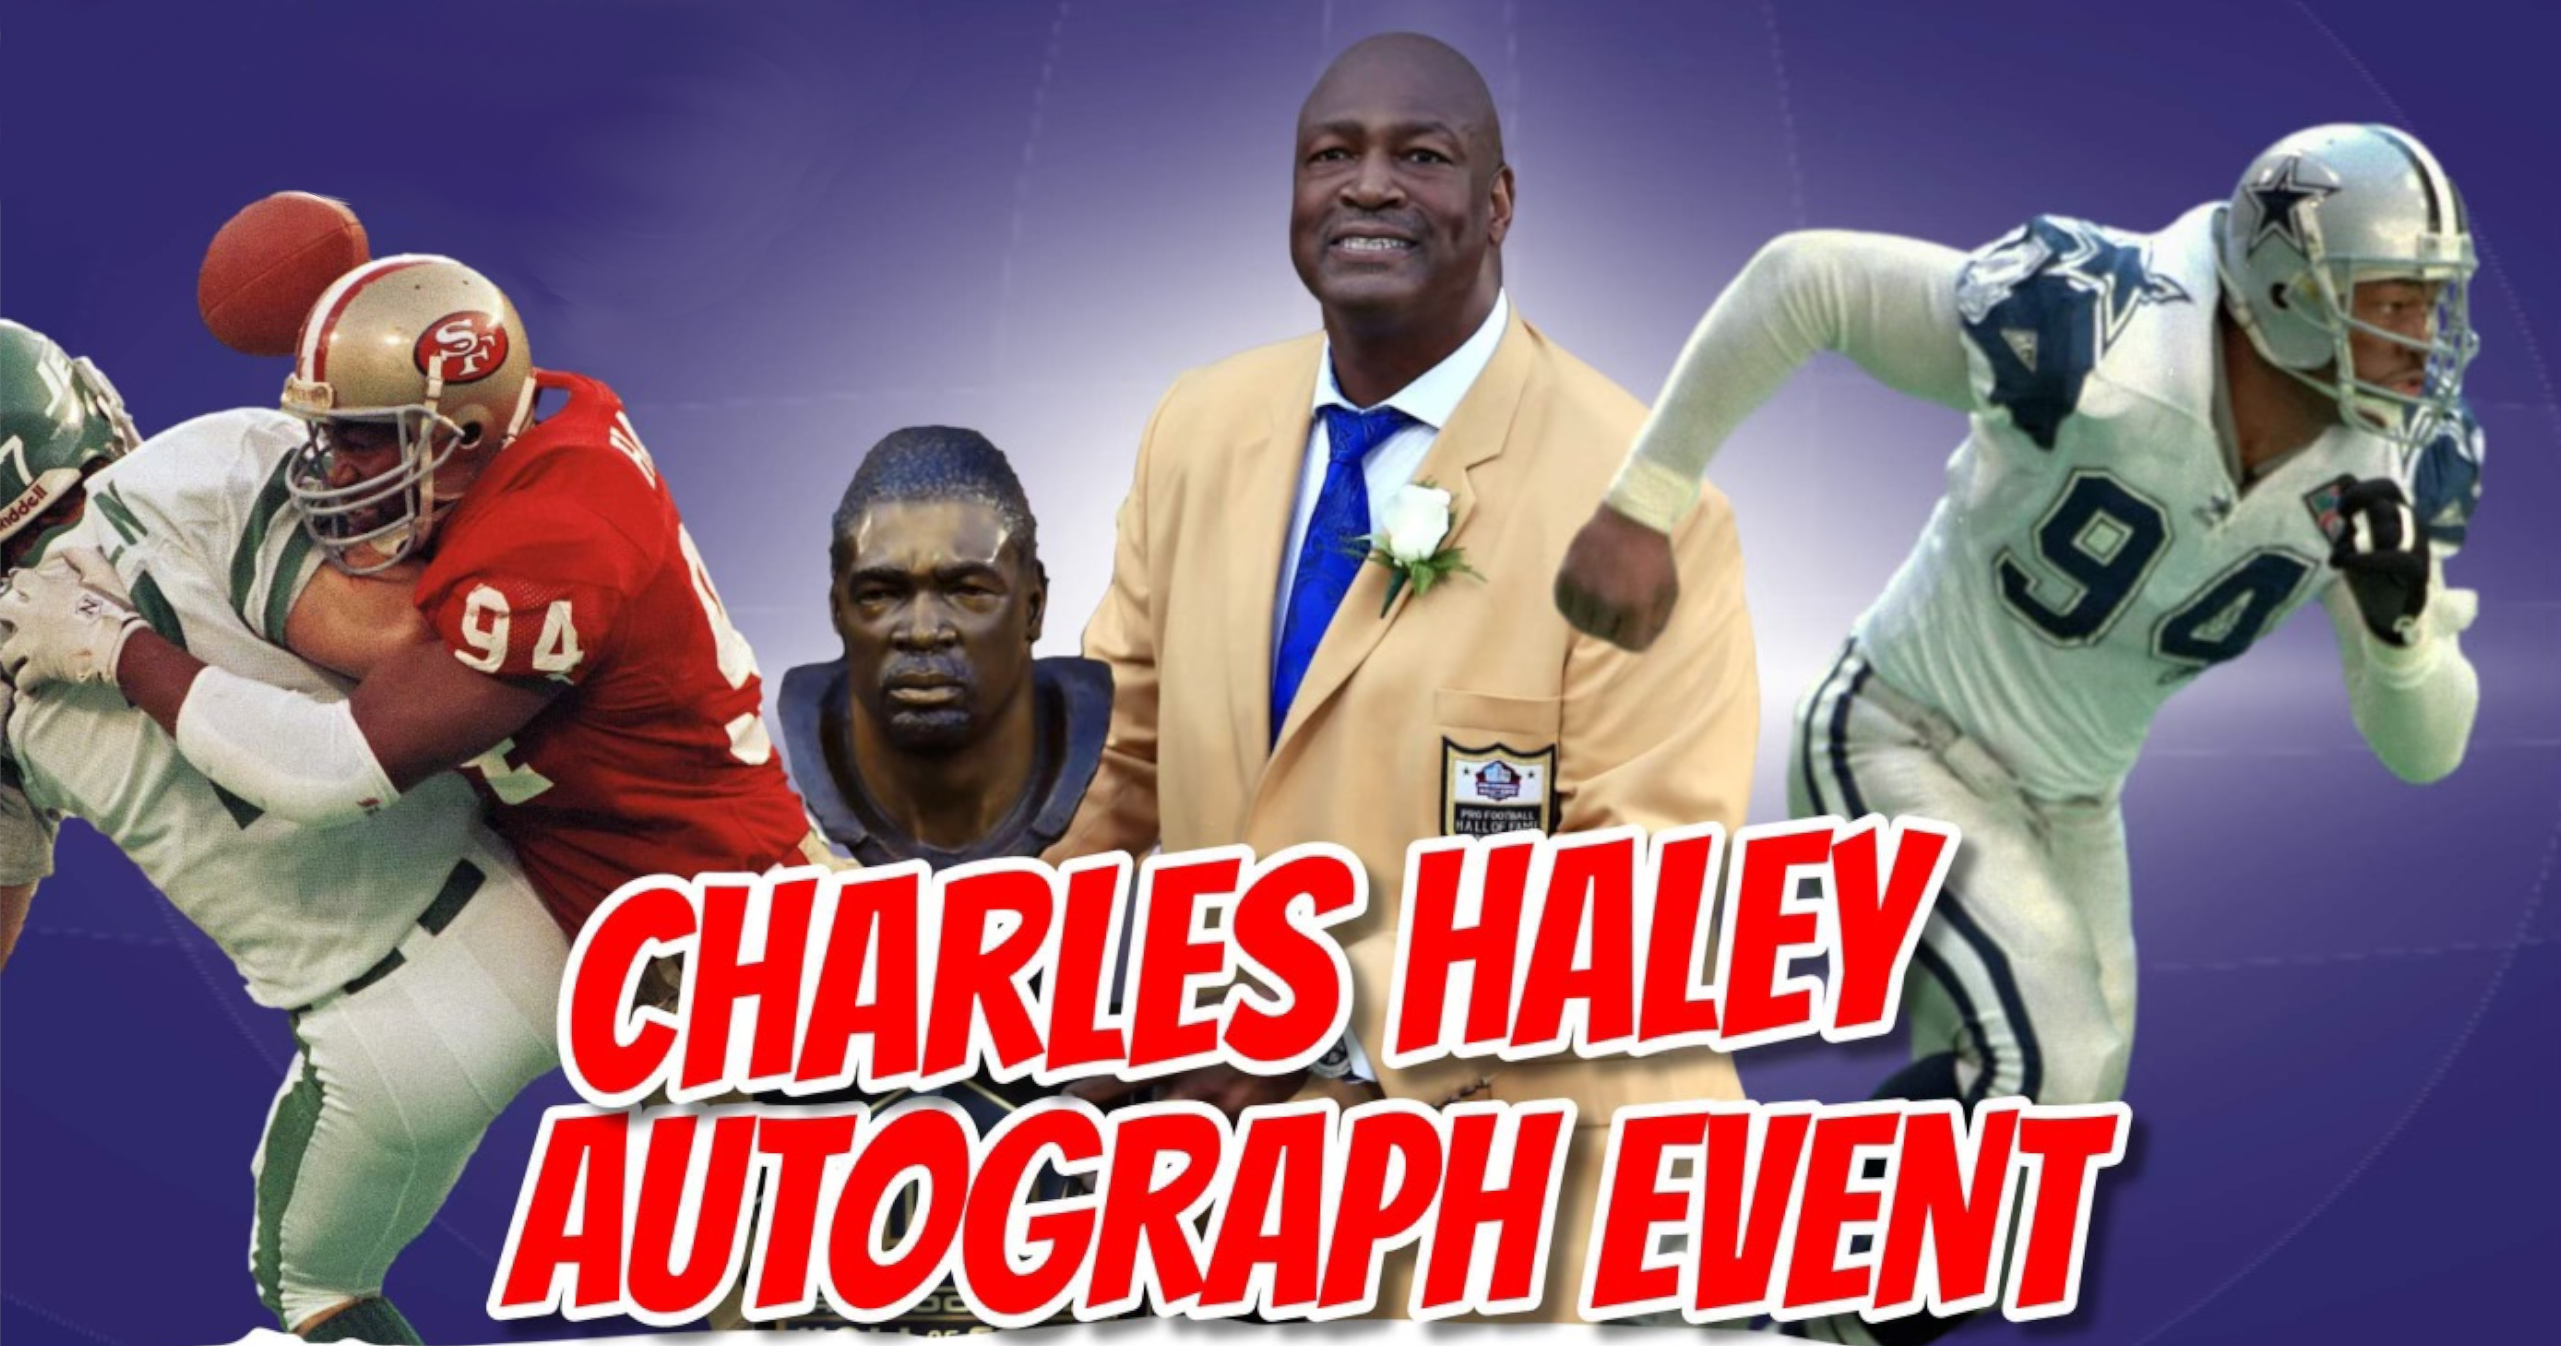 Charles Haley Autograph Event